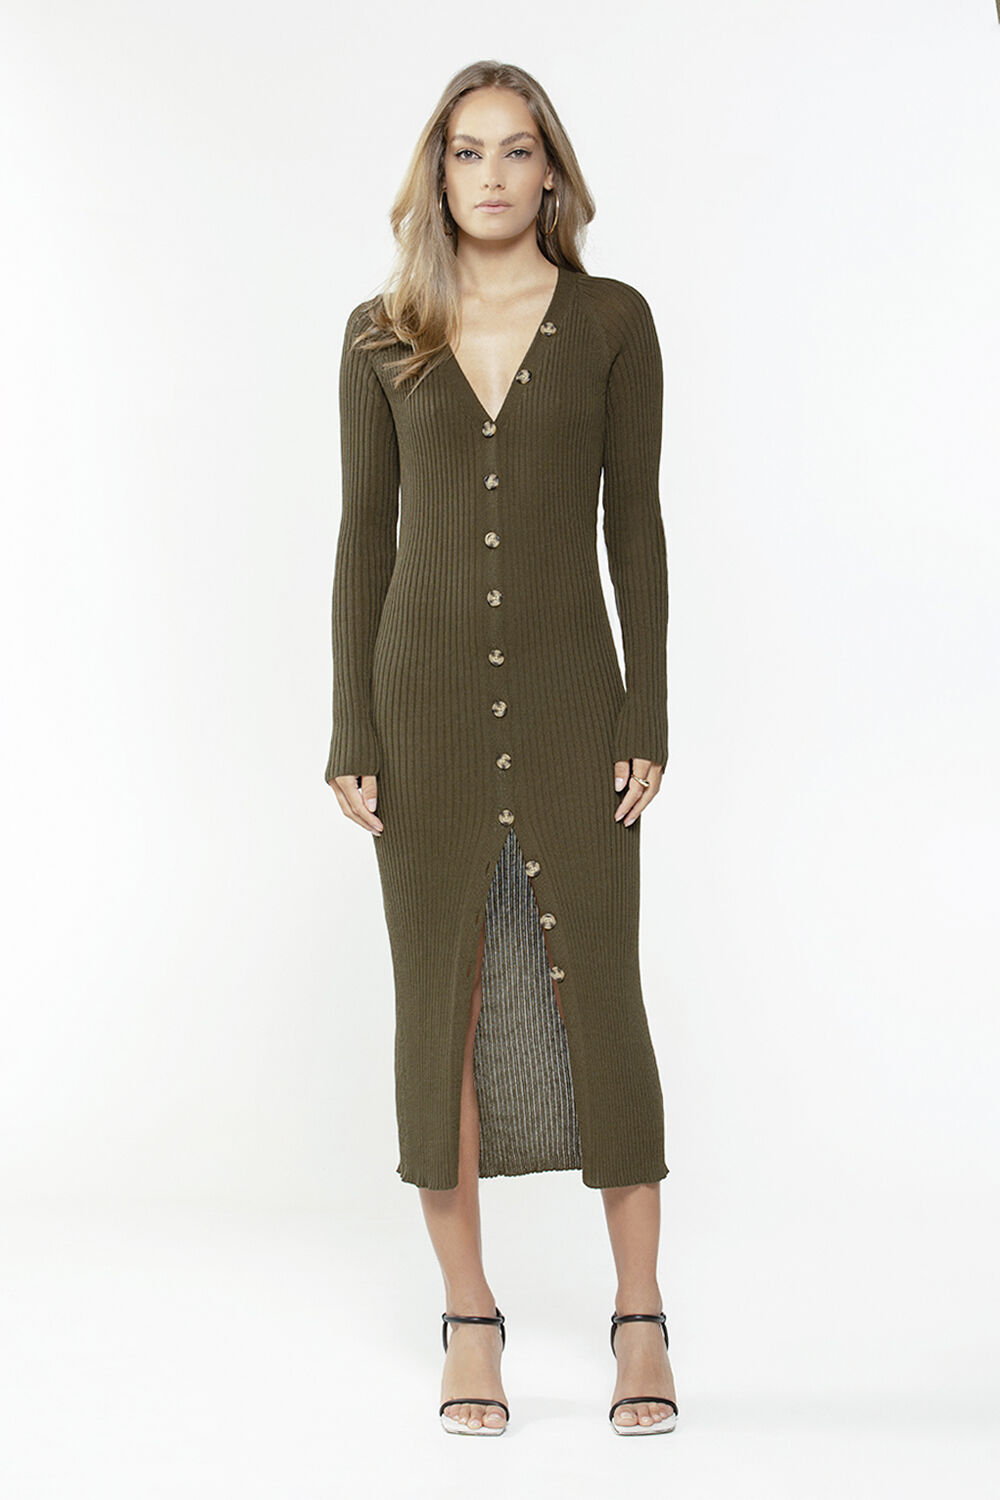 BUTTON FRONT KNIT DRESS in colour IVY GREEN